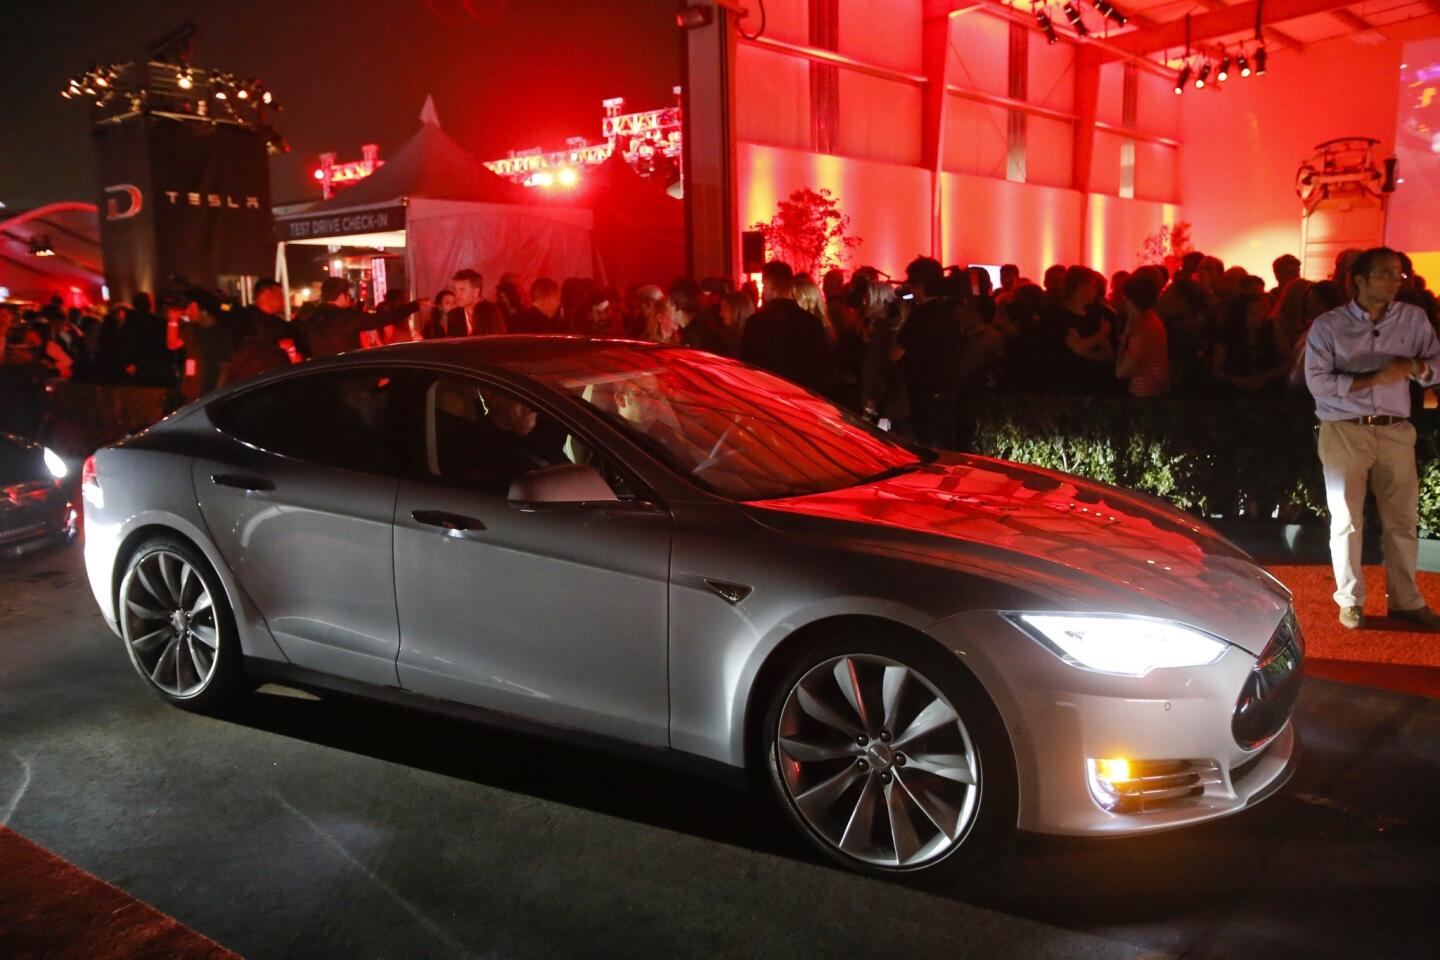 Tesla announced a dual motor version of its Model S sedan, the P85D, above, on Thursday night at its Hawthorne Airport facility.